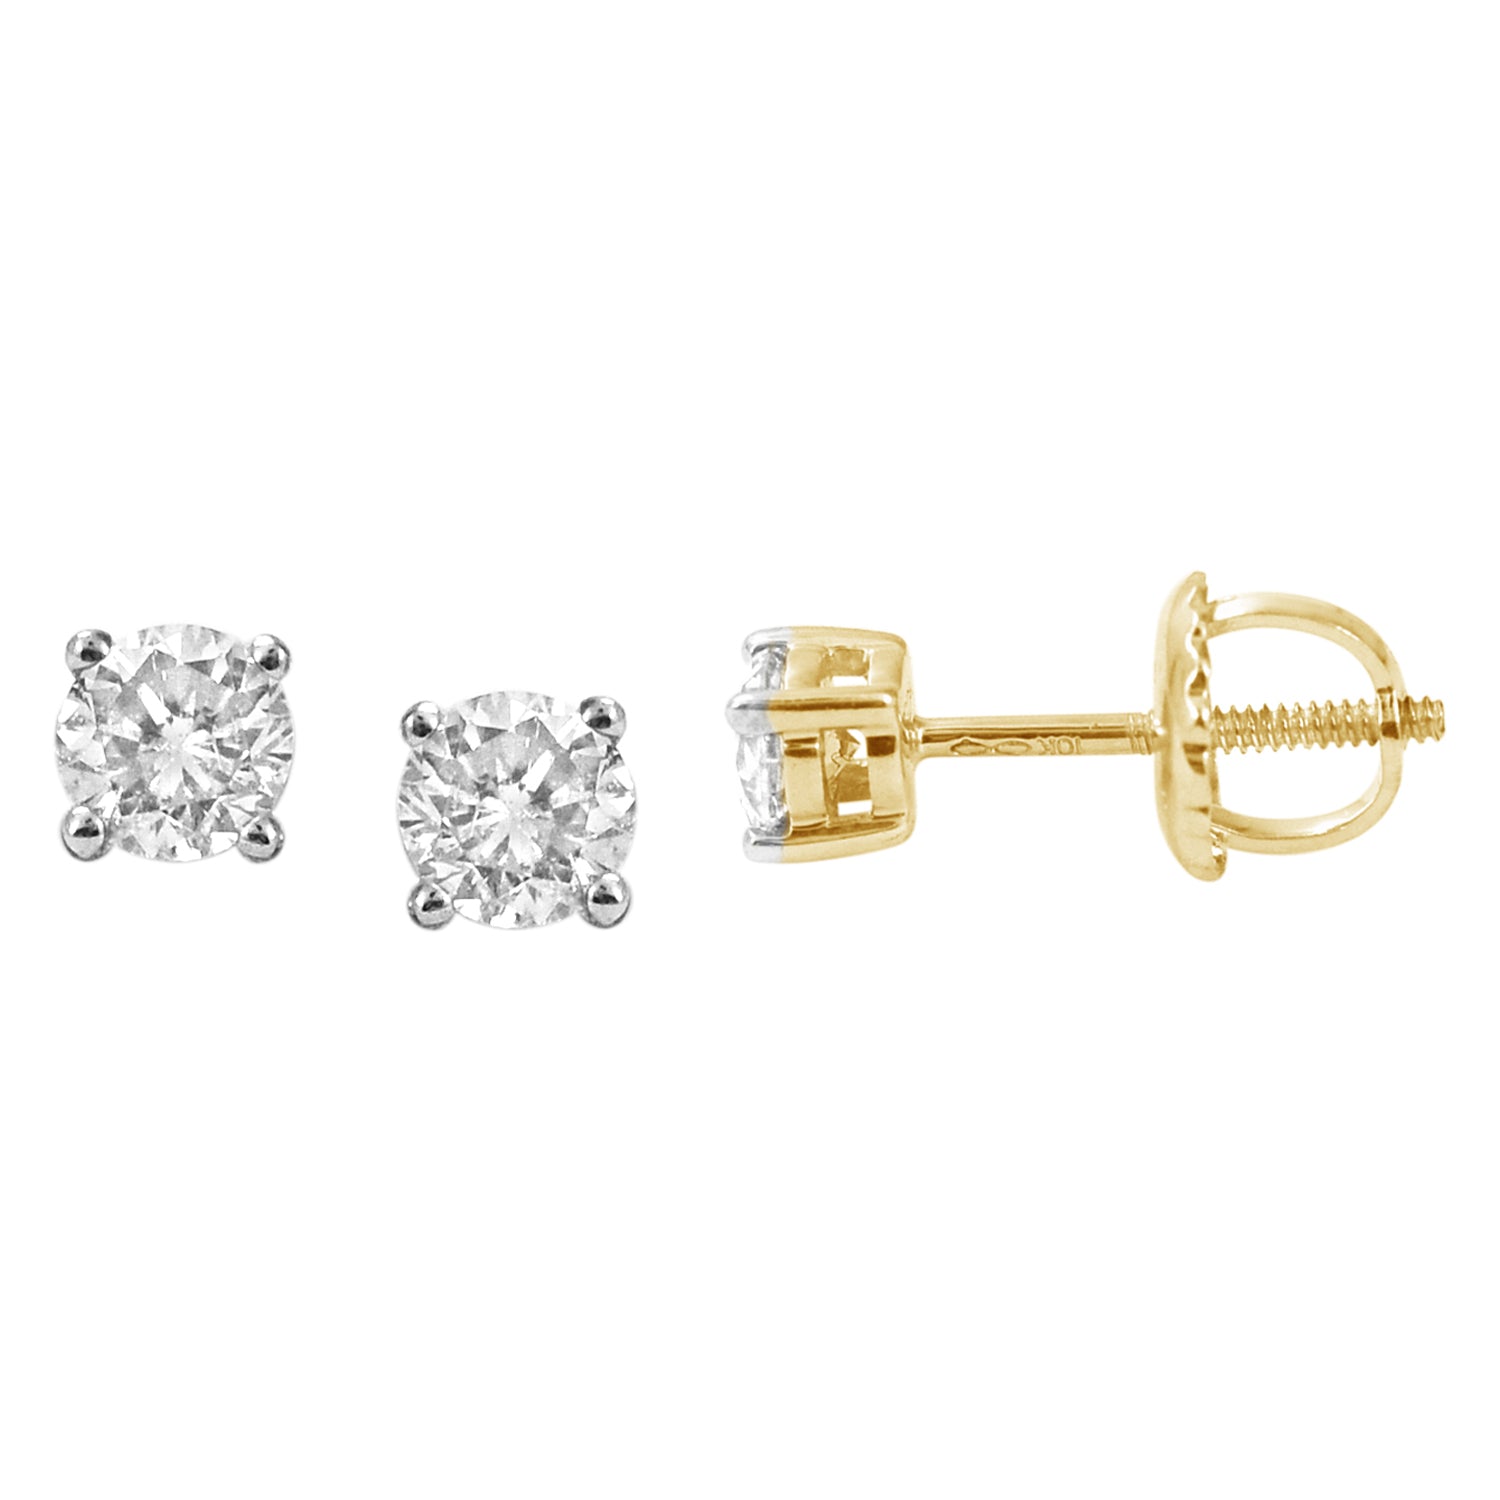 Round Studs / Earrings With 0.28 Carat TW Of Diamonds In 10K Yellow Gold